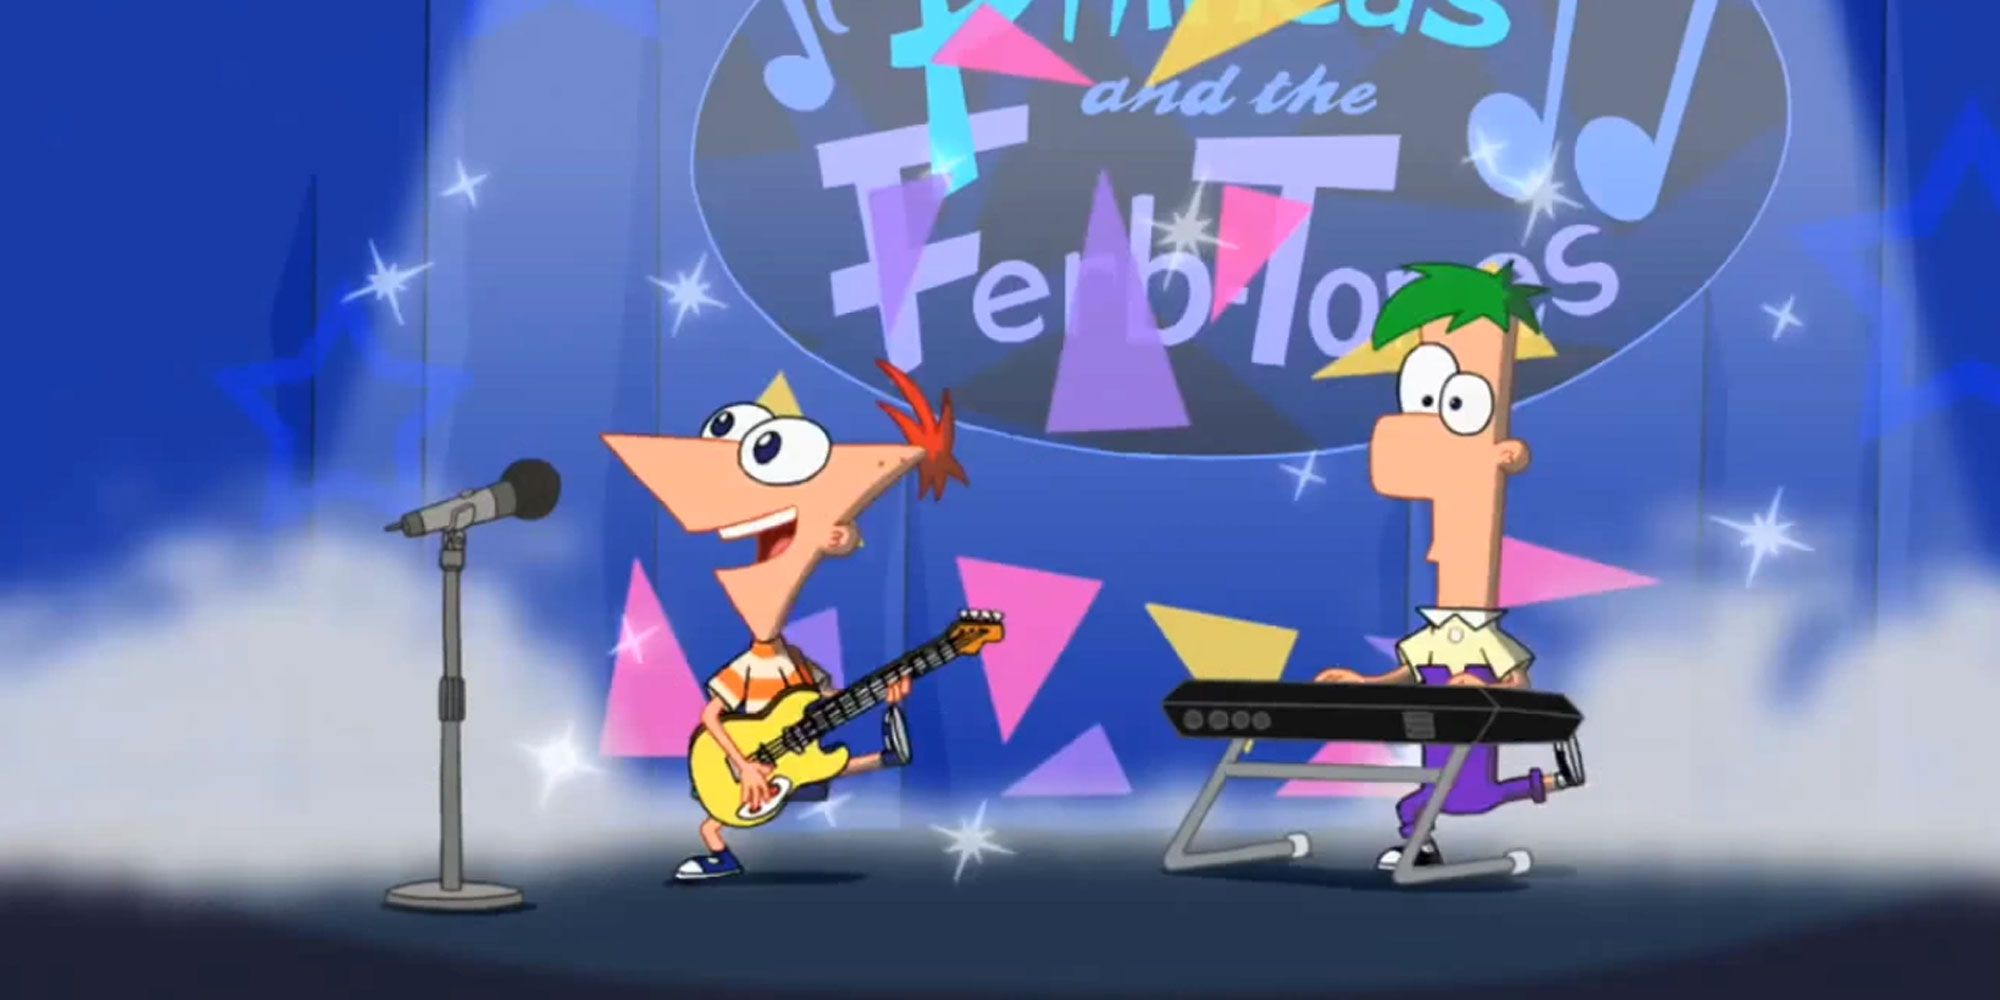 Phineas and ferb on stage playing instruments